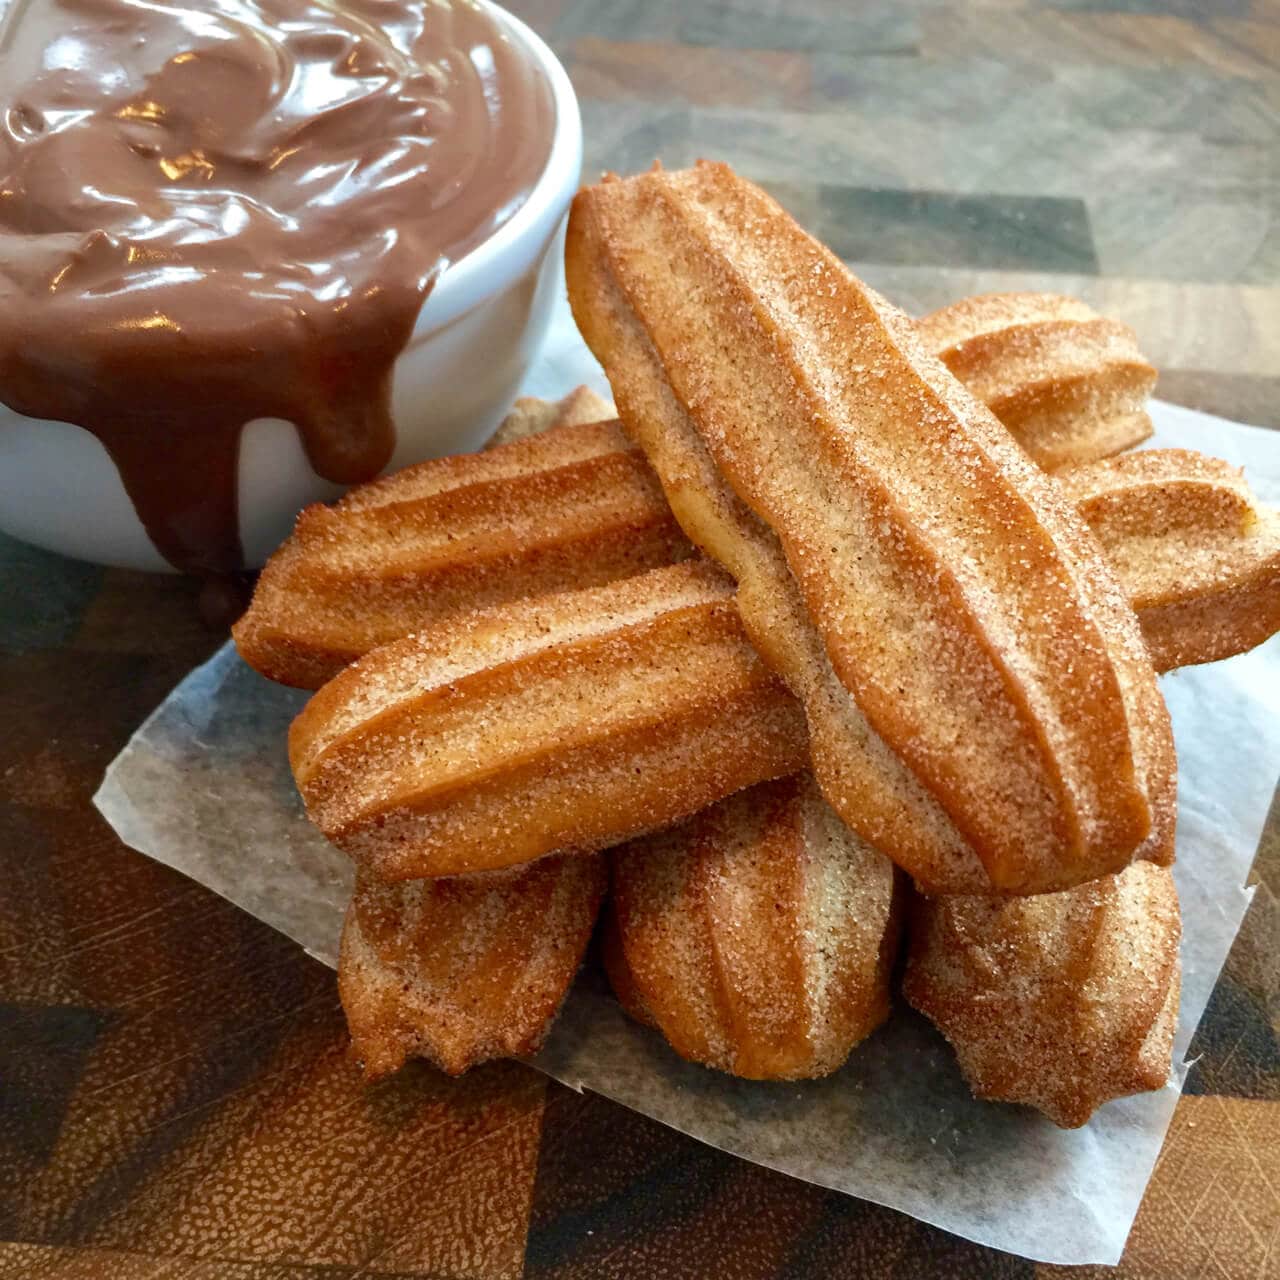 A close up of the cinnamon-sugar texture on my Homemade Churros, which are bake churros, not fried.